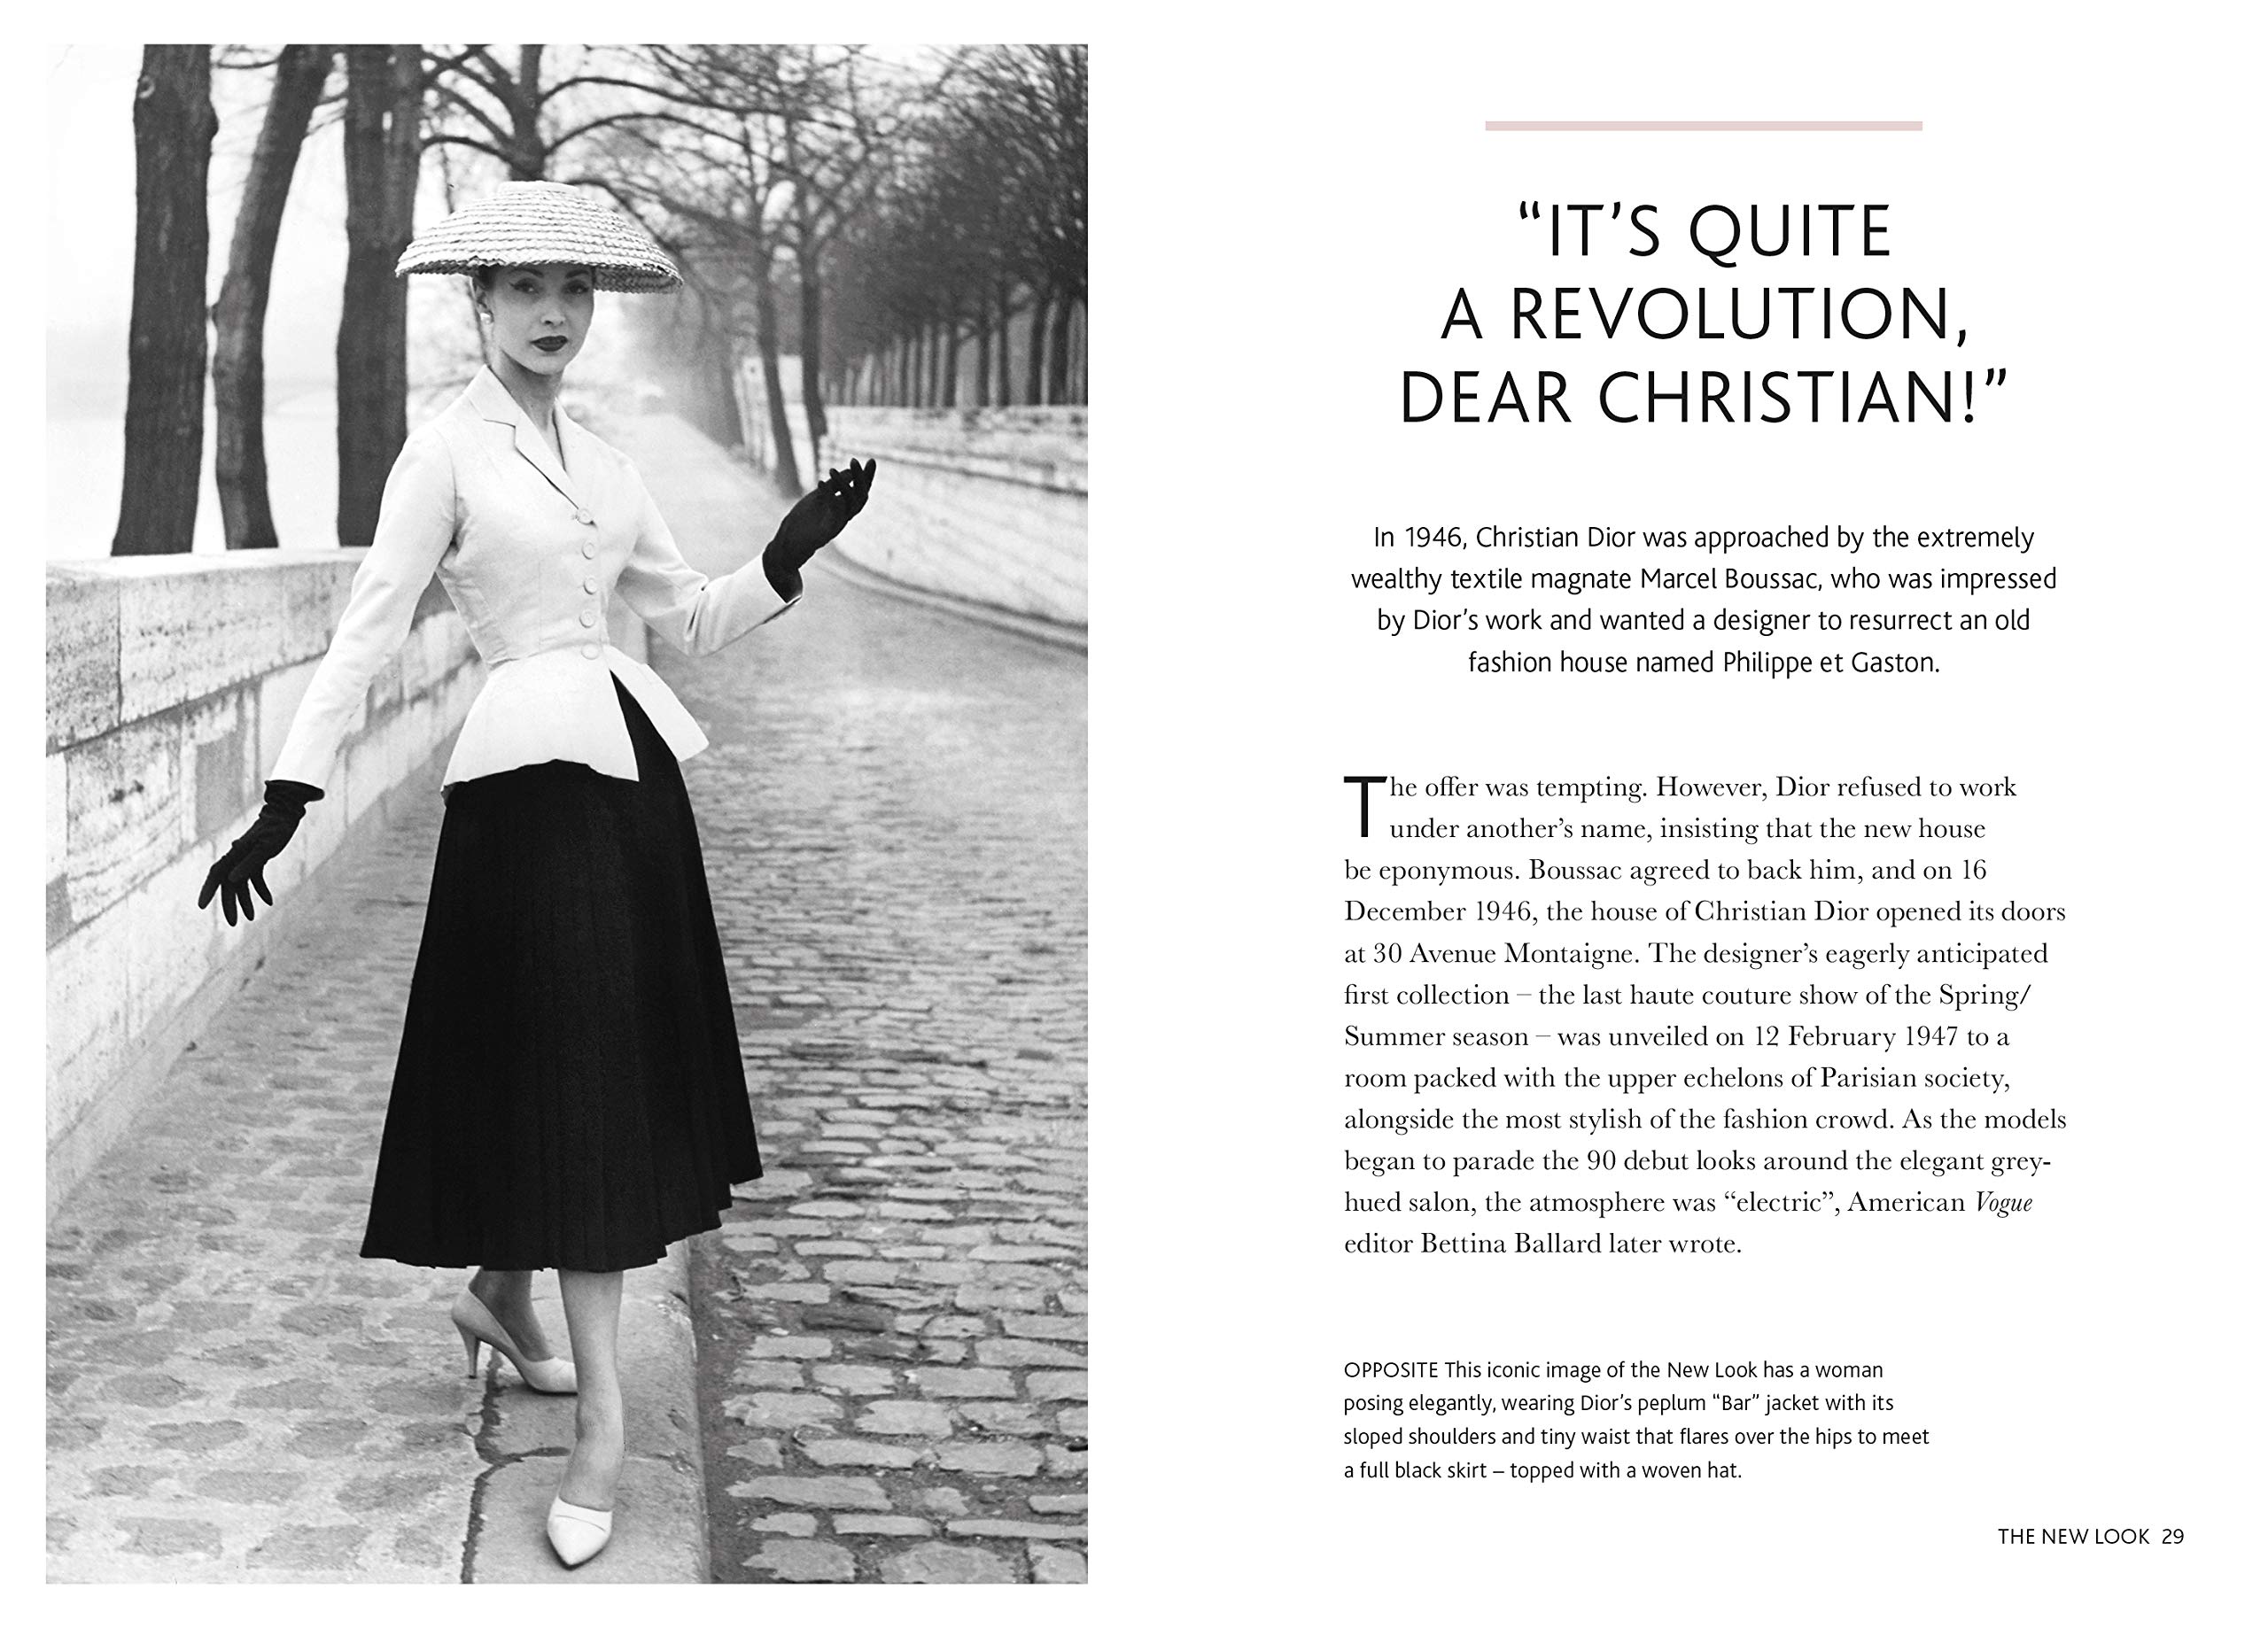 Musée Christian Dior to Focus on New Look Revolution  CoutureNotebook